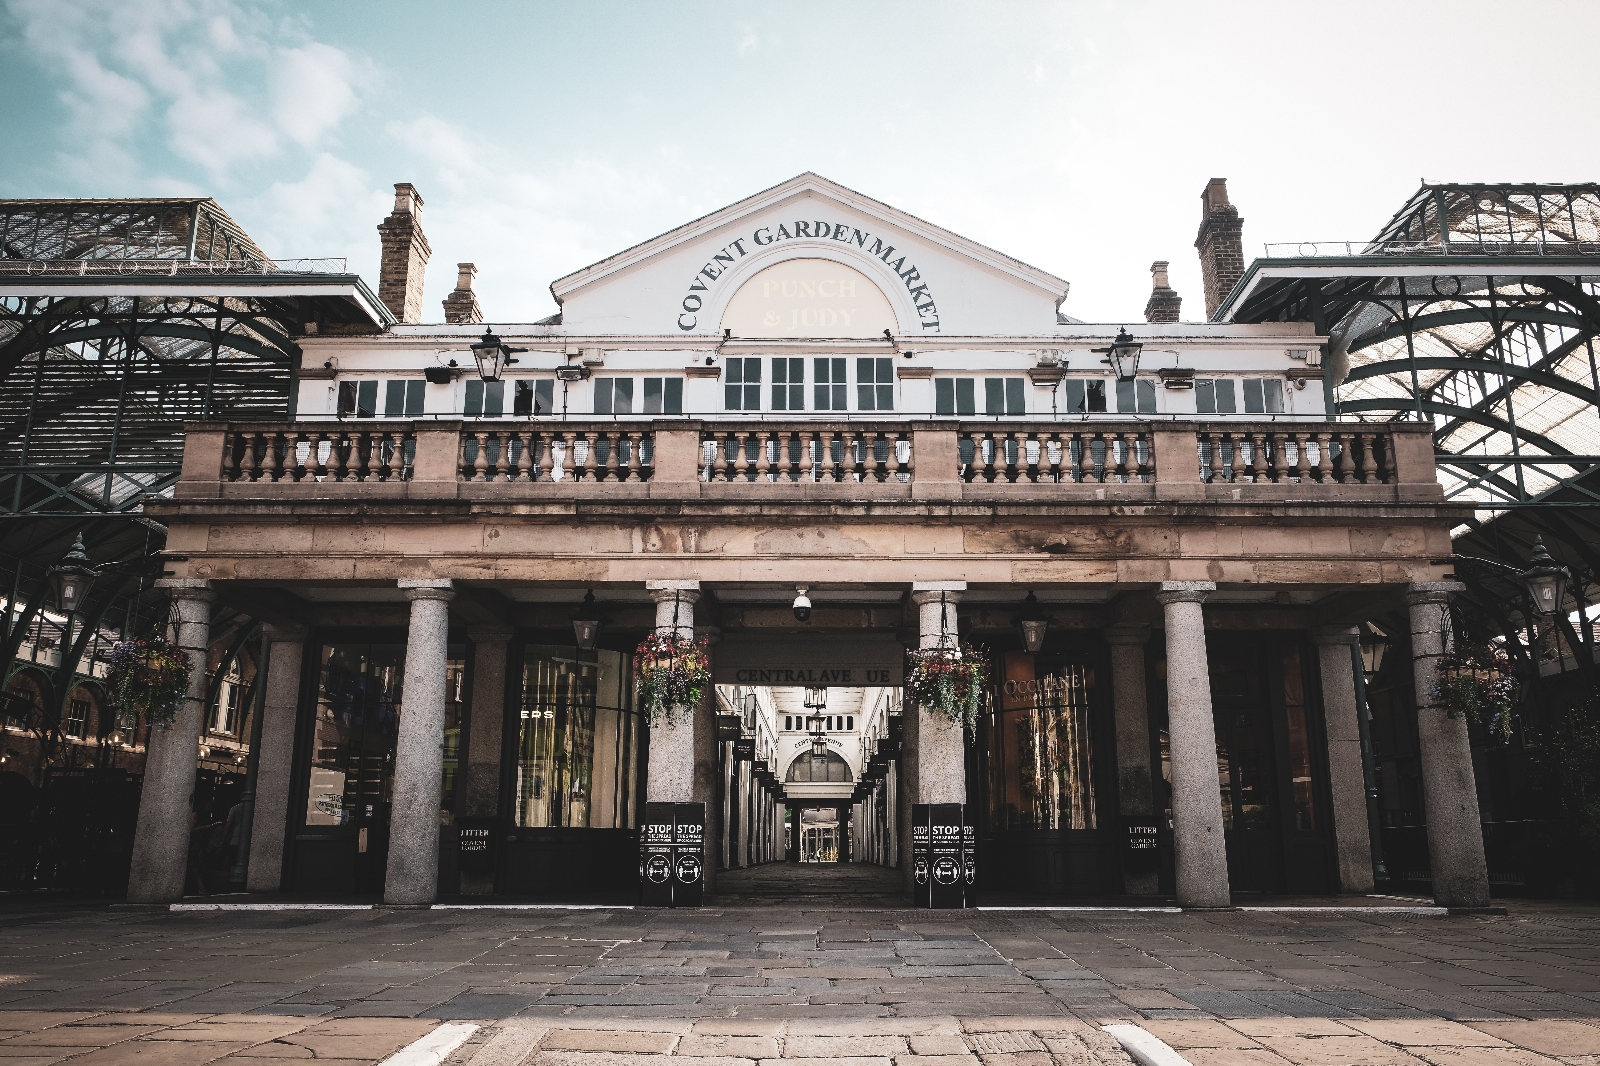 Image of Covent Garden by Jonny Brown